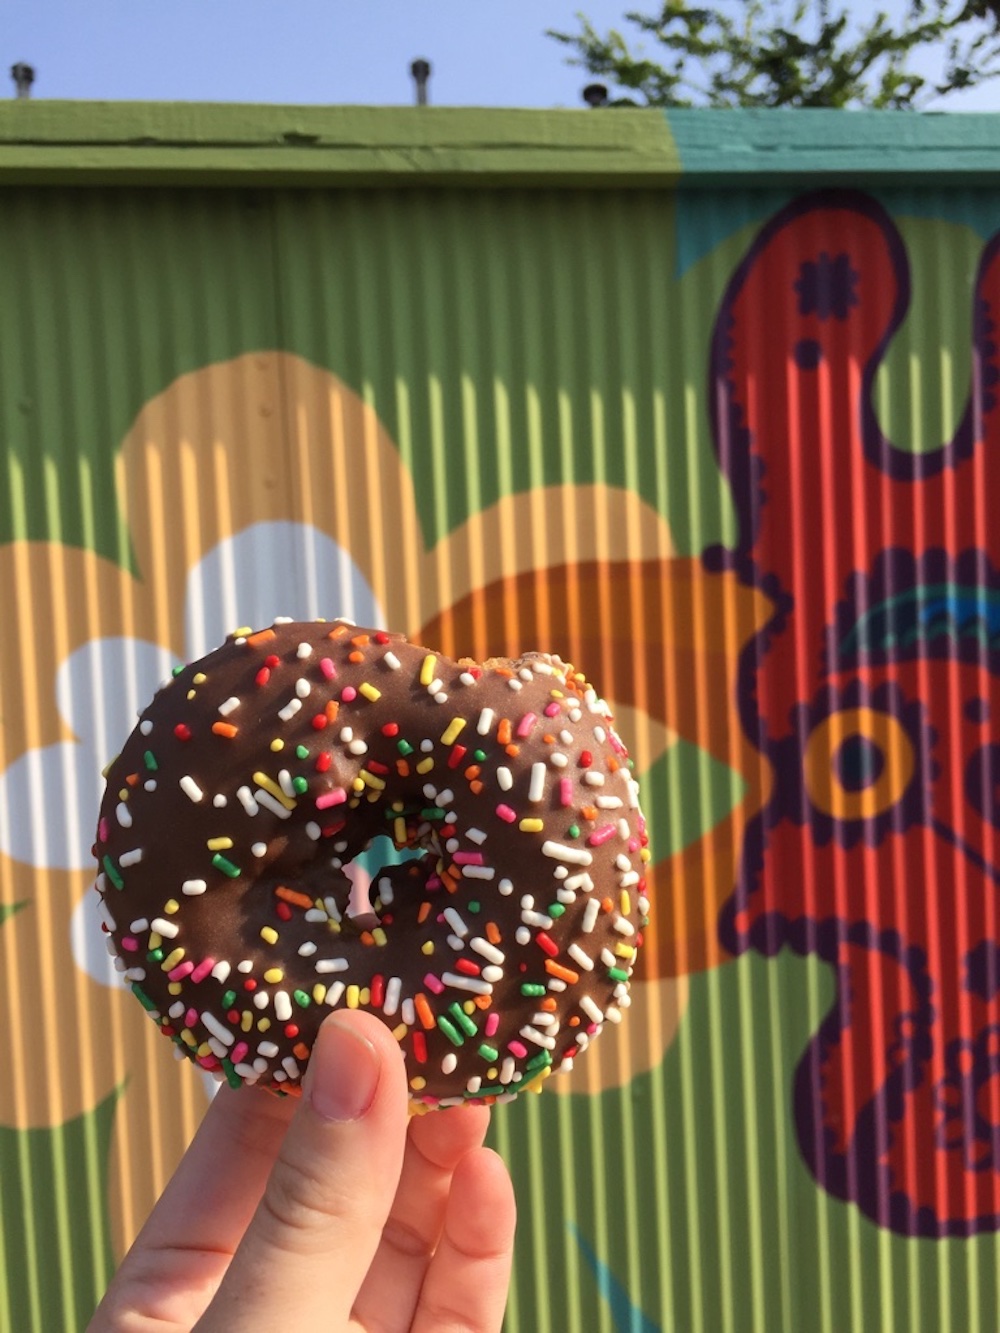 Chocolate frosted donut with rainbow sprinkles in front of rooster mural at The Donut Whole in Wichita, Kansas